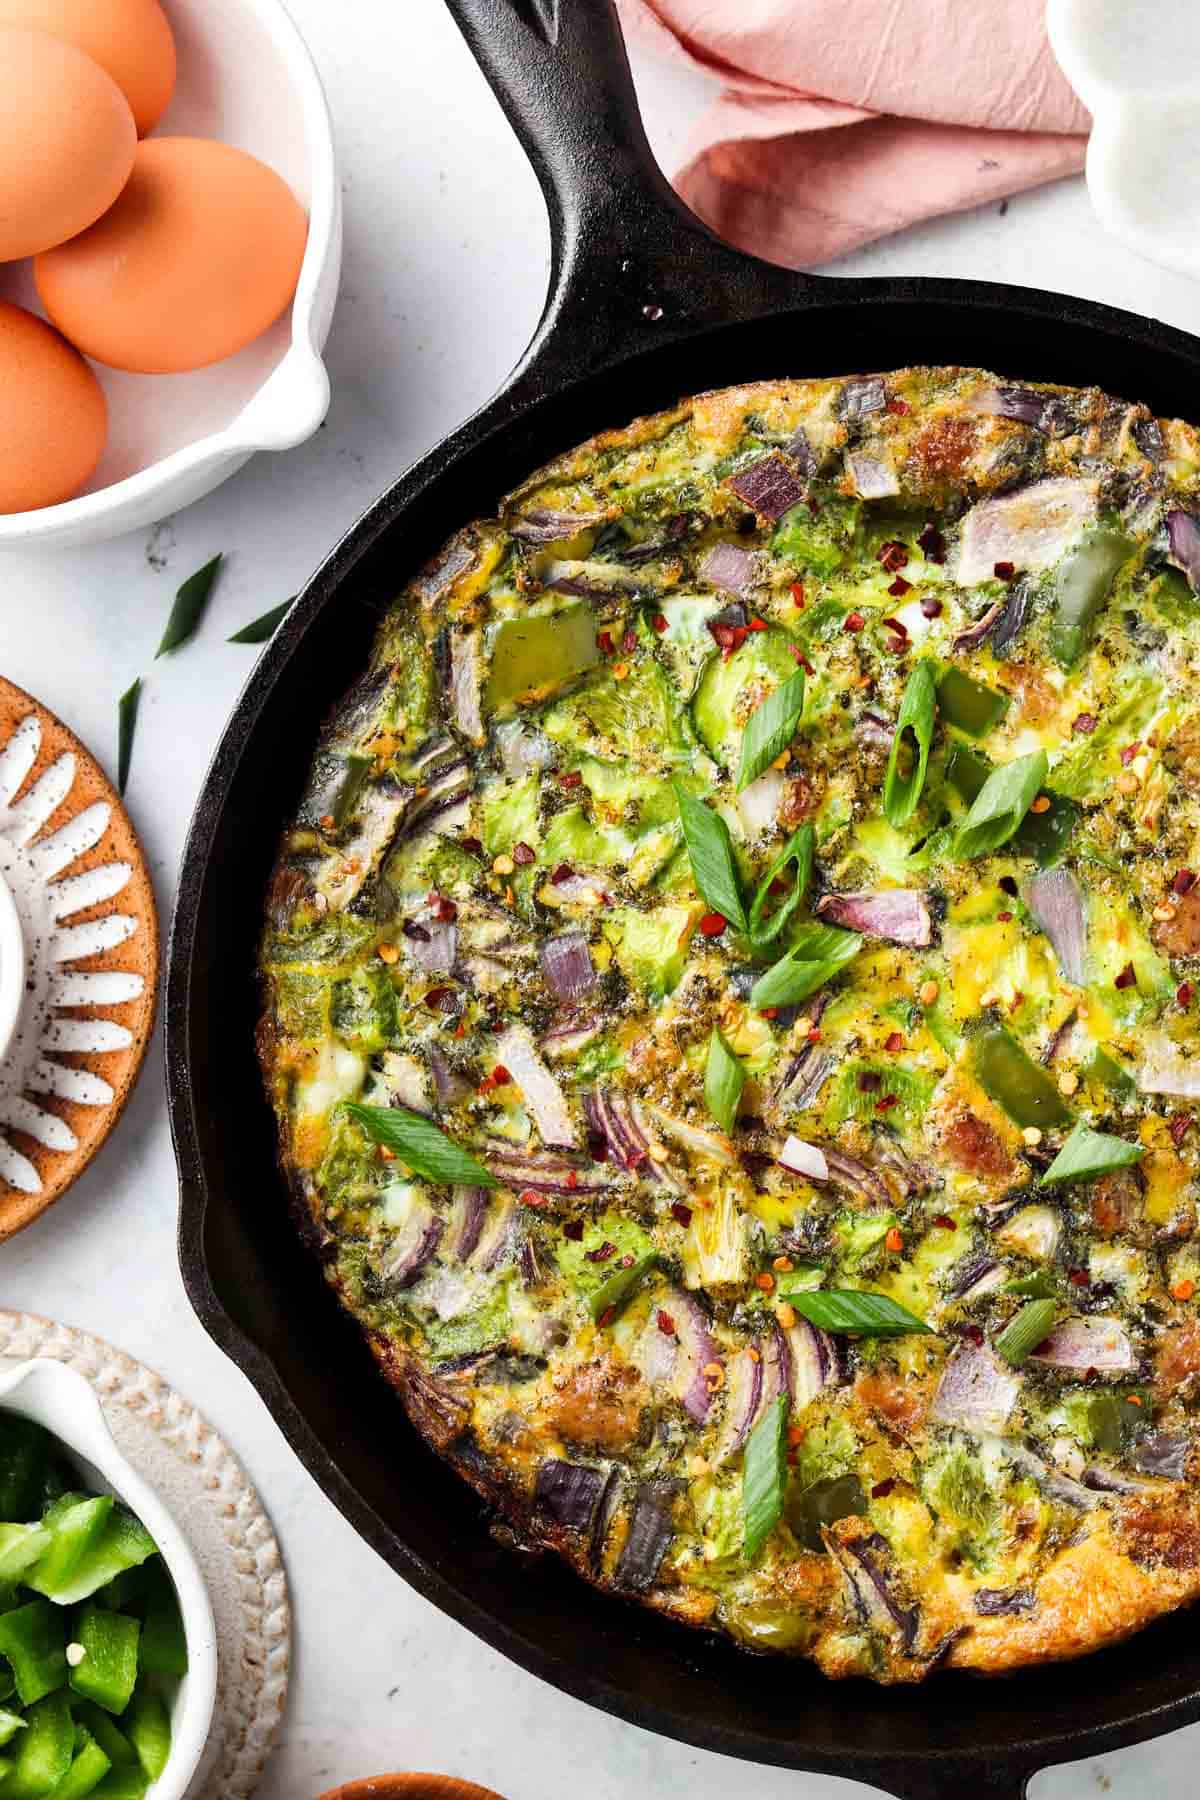 Egg frittata in a cast iron pan with fresh pepper on top.